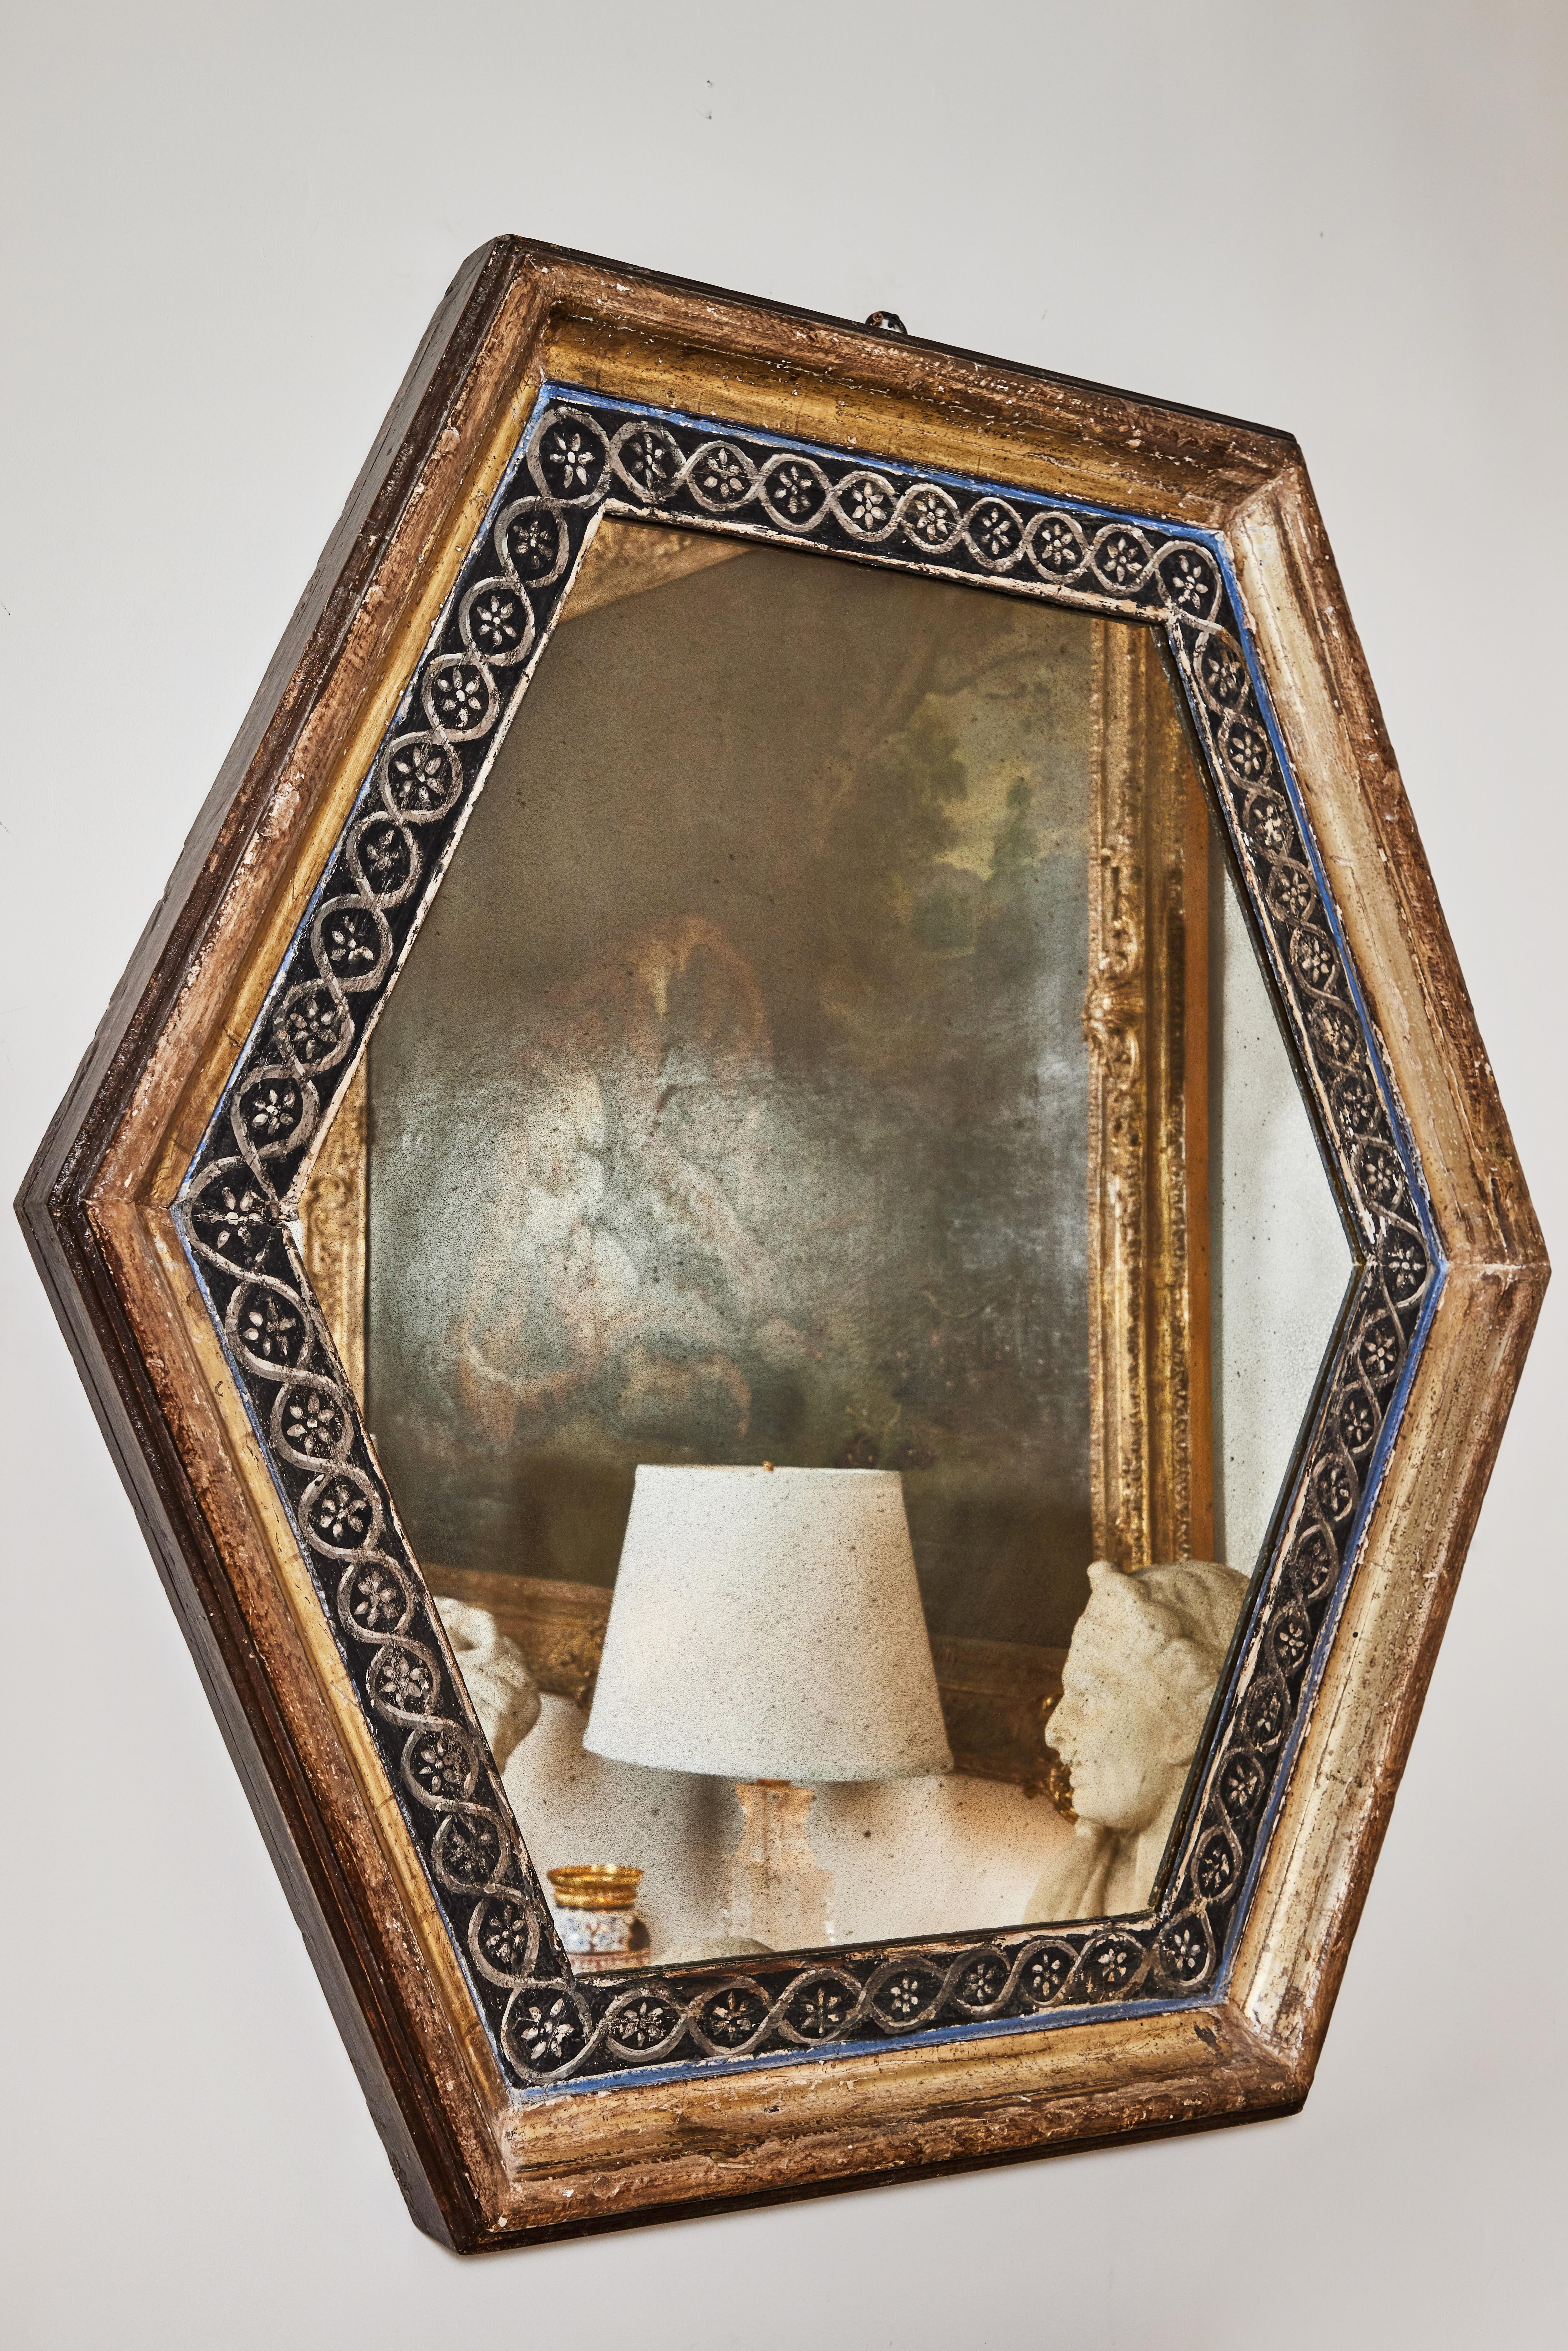 Striking pair of large, gessoed, 24-karat gold water gilded hexagonal, Tuscan frames inset with newer antiqued glass. Each with a stunning, hand painted, inner band of ebonized wood.